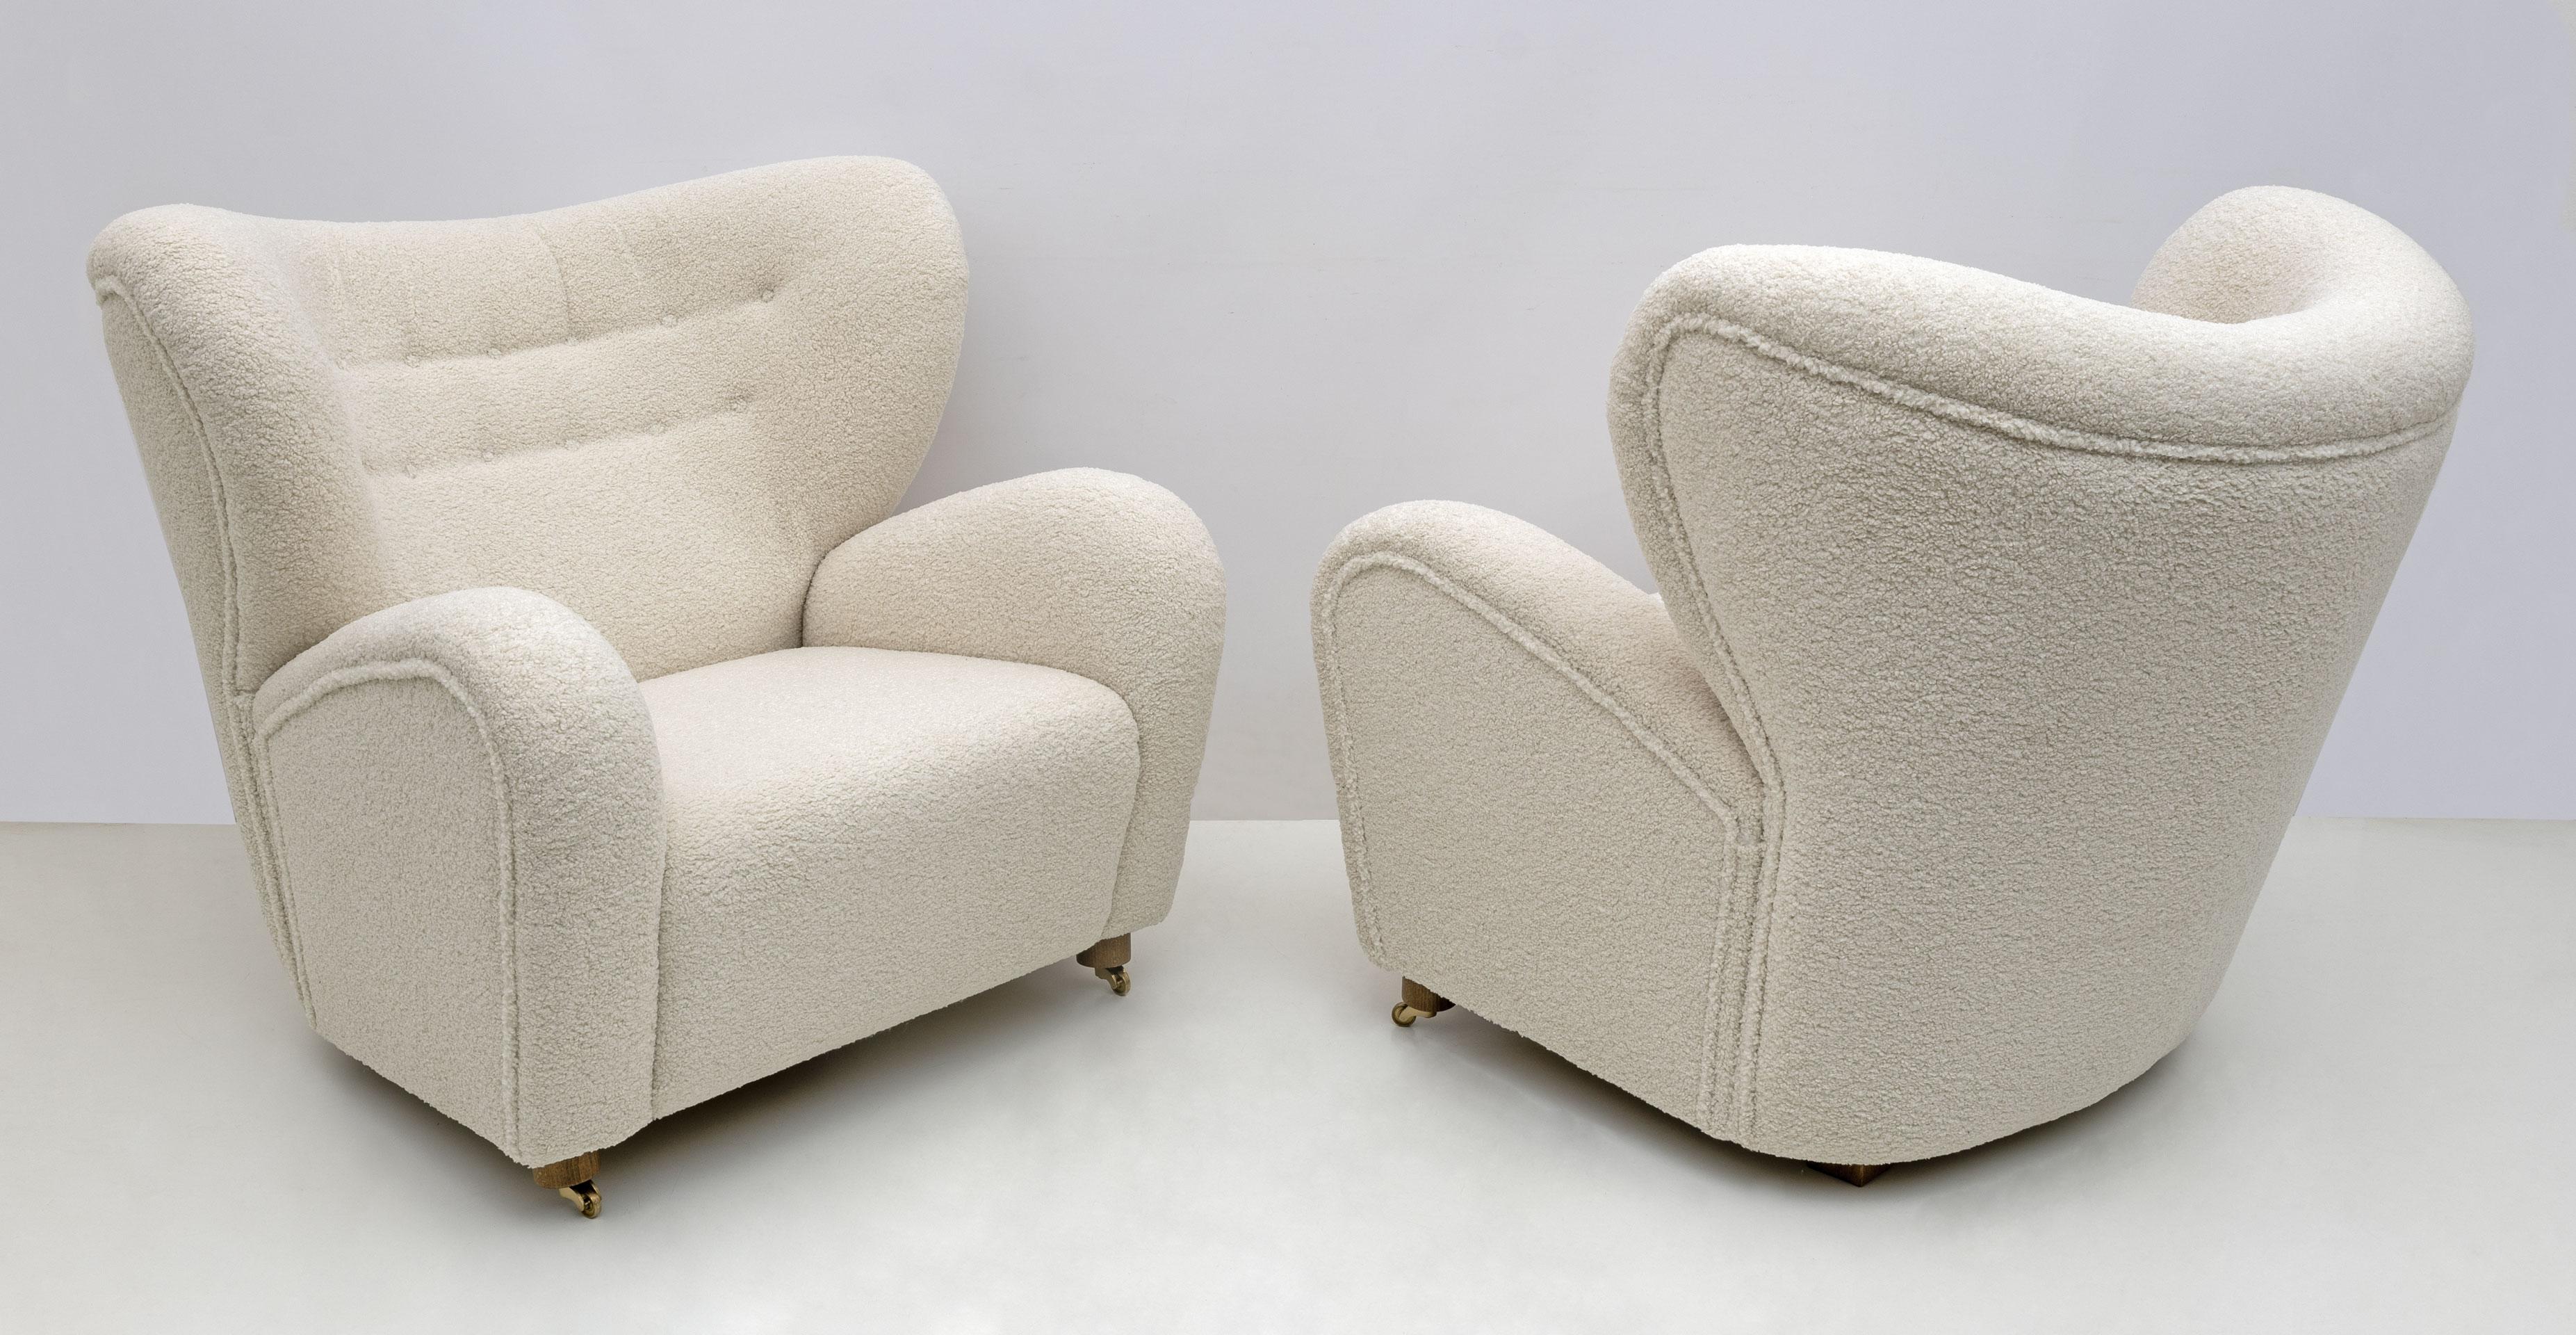 Set of 2 beige Sahco Zero The Tired Man lounge chairs by Lassen. Flemming Lassen designed the upholstered armchair The Stanco in 1935 for the Copenhagen cabinetmakers' guild competition. It is characterized by organic, bear-like shapes and caused a